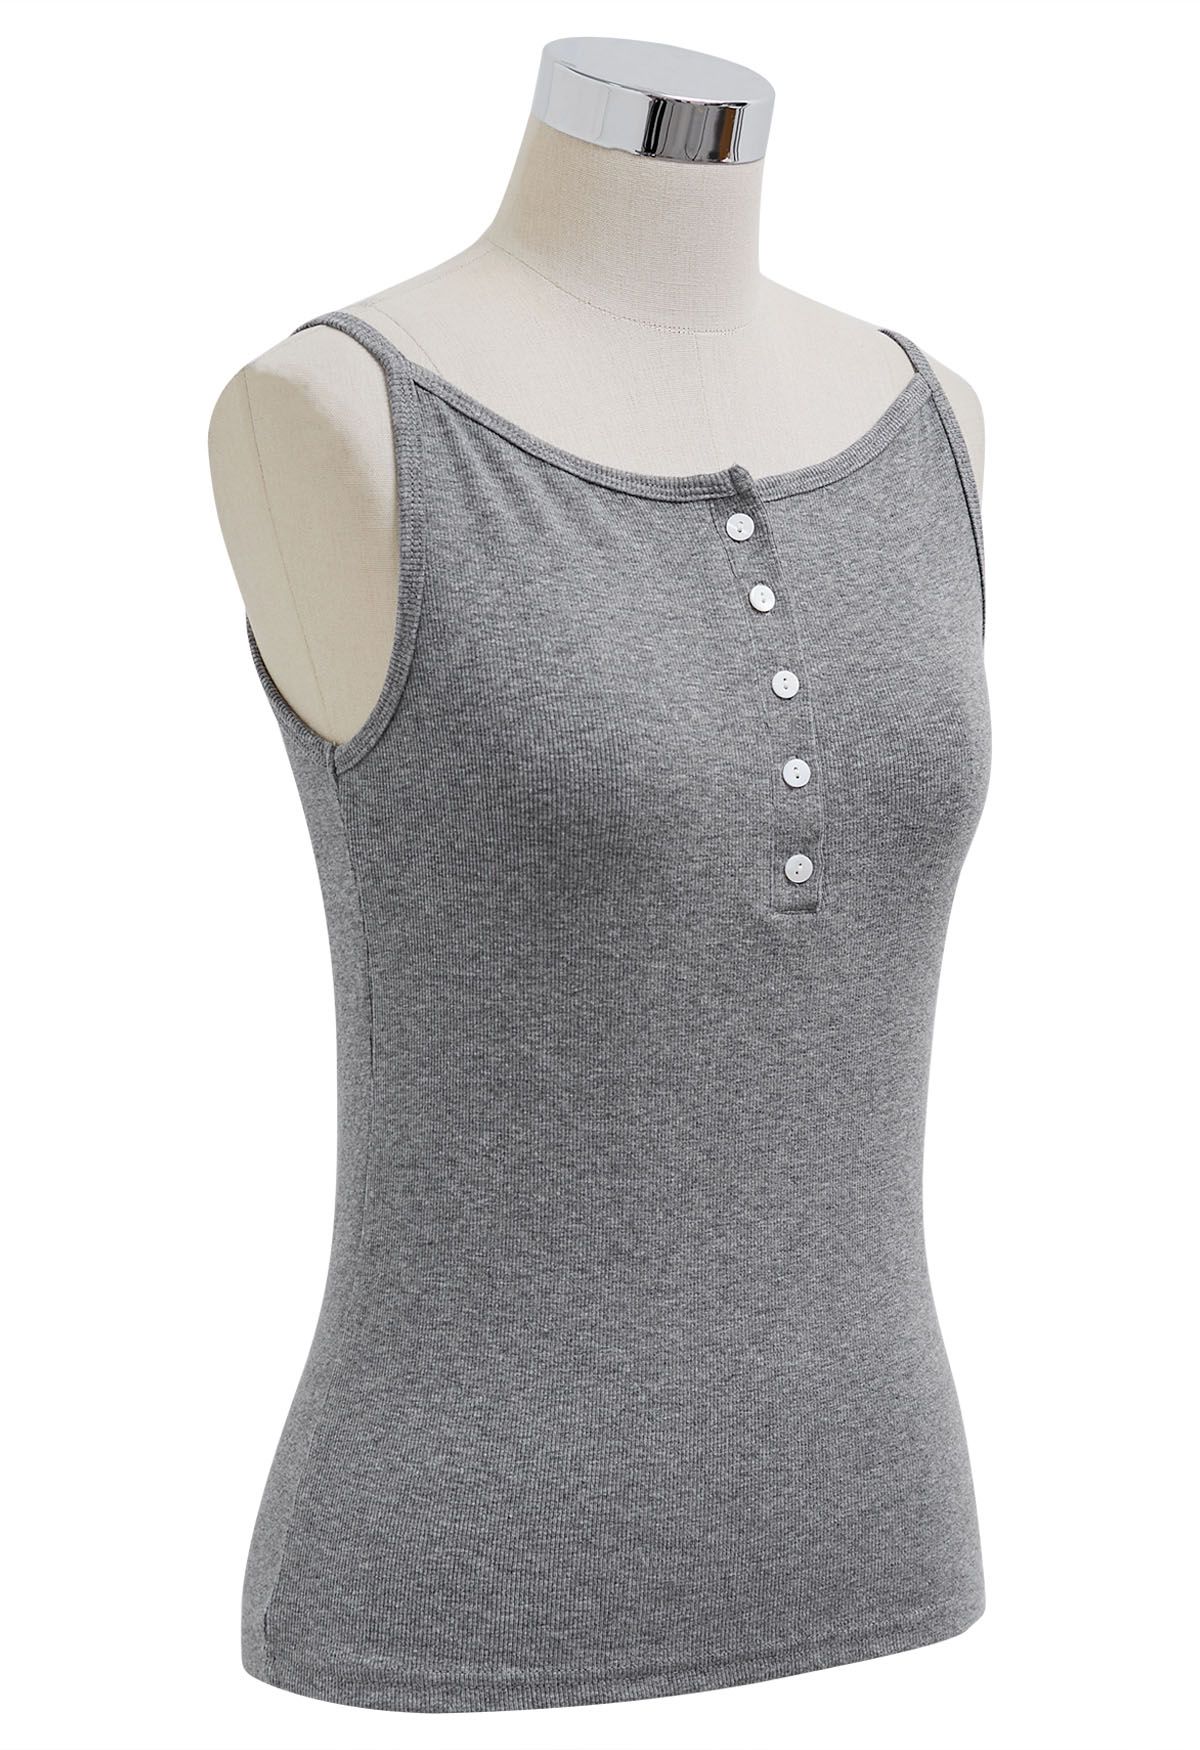 Simplicity Front Buttoned Cami Top in Grey